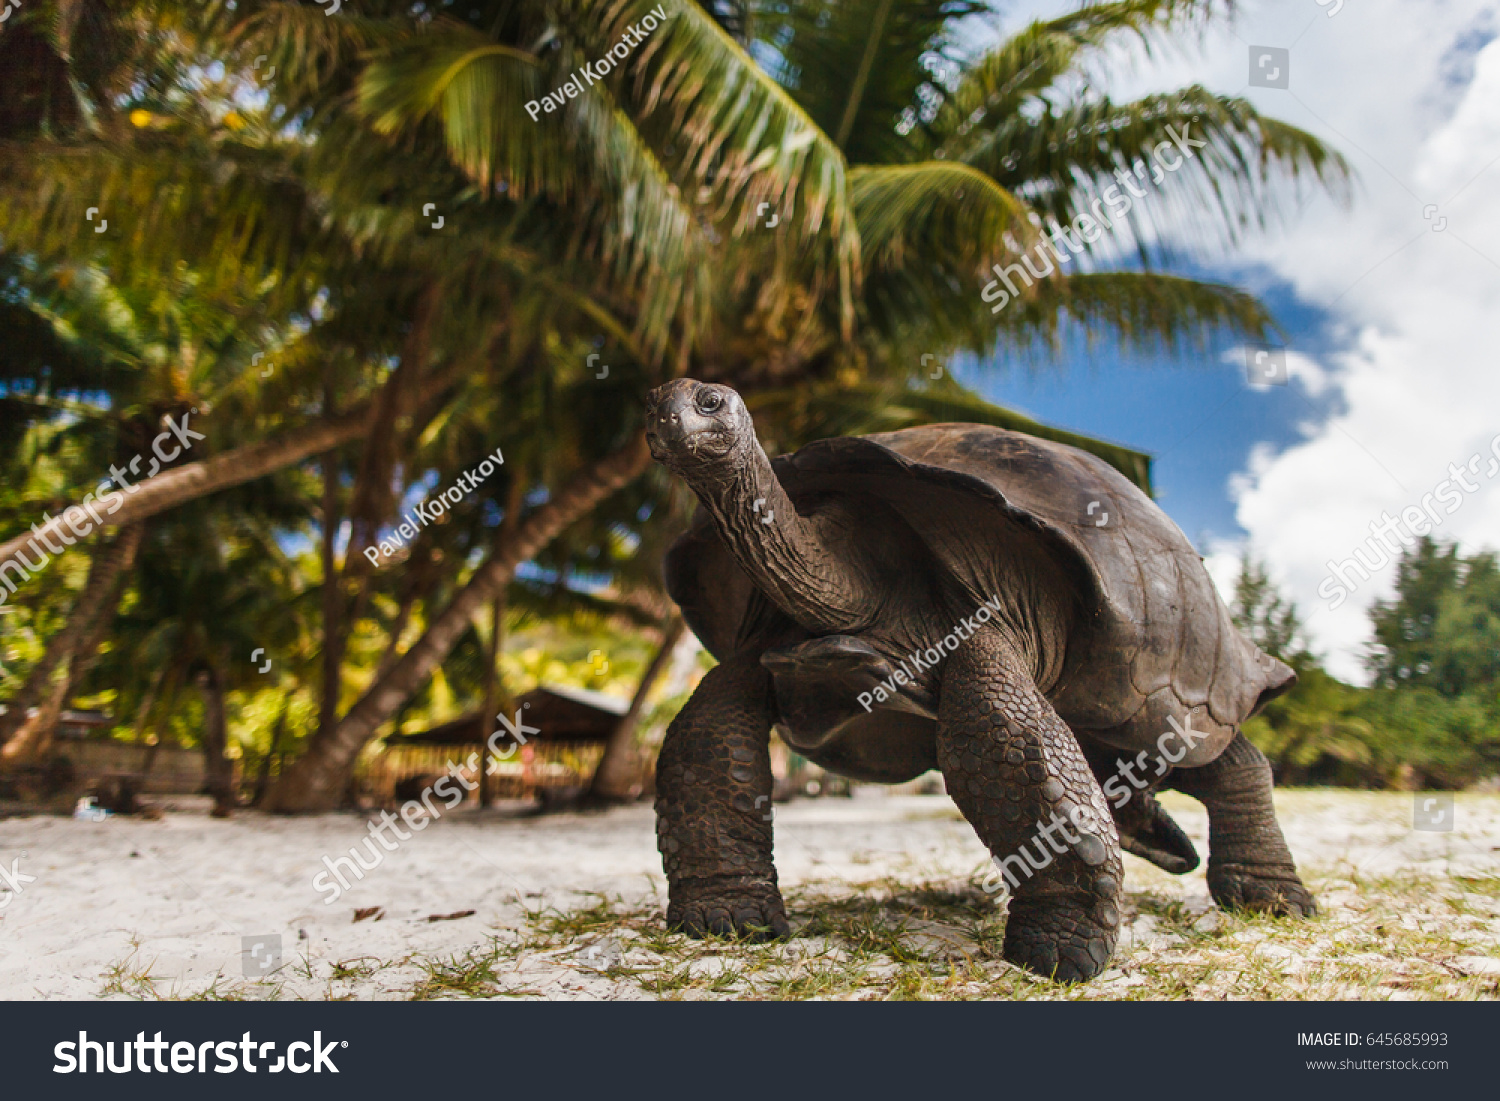 Giant turtles on Curieuse Island. Seychelles.  #645685993